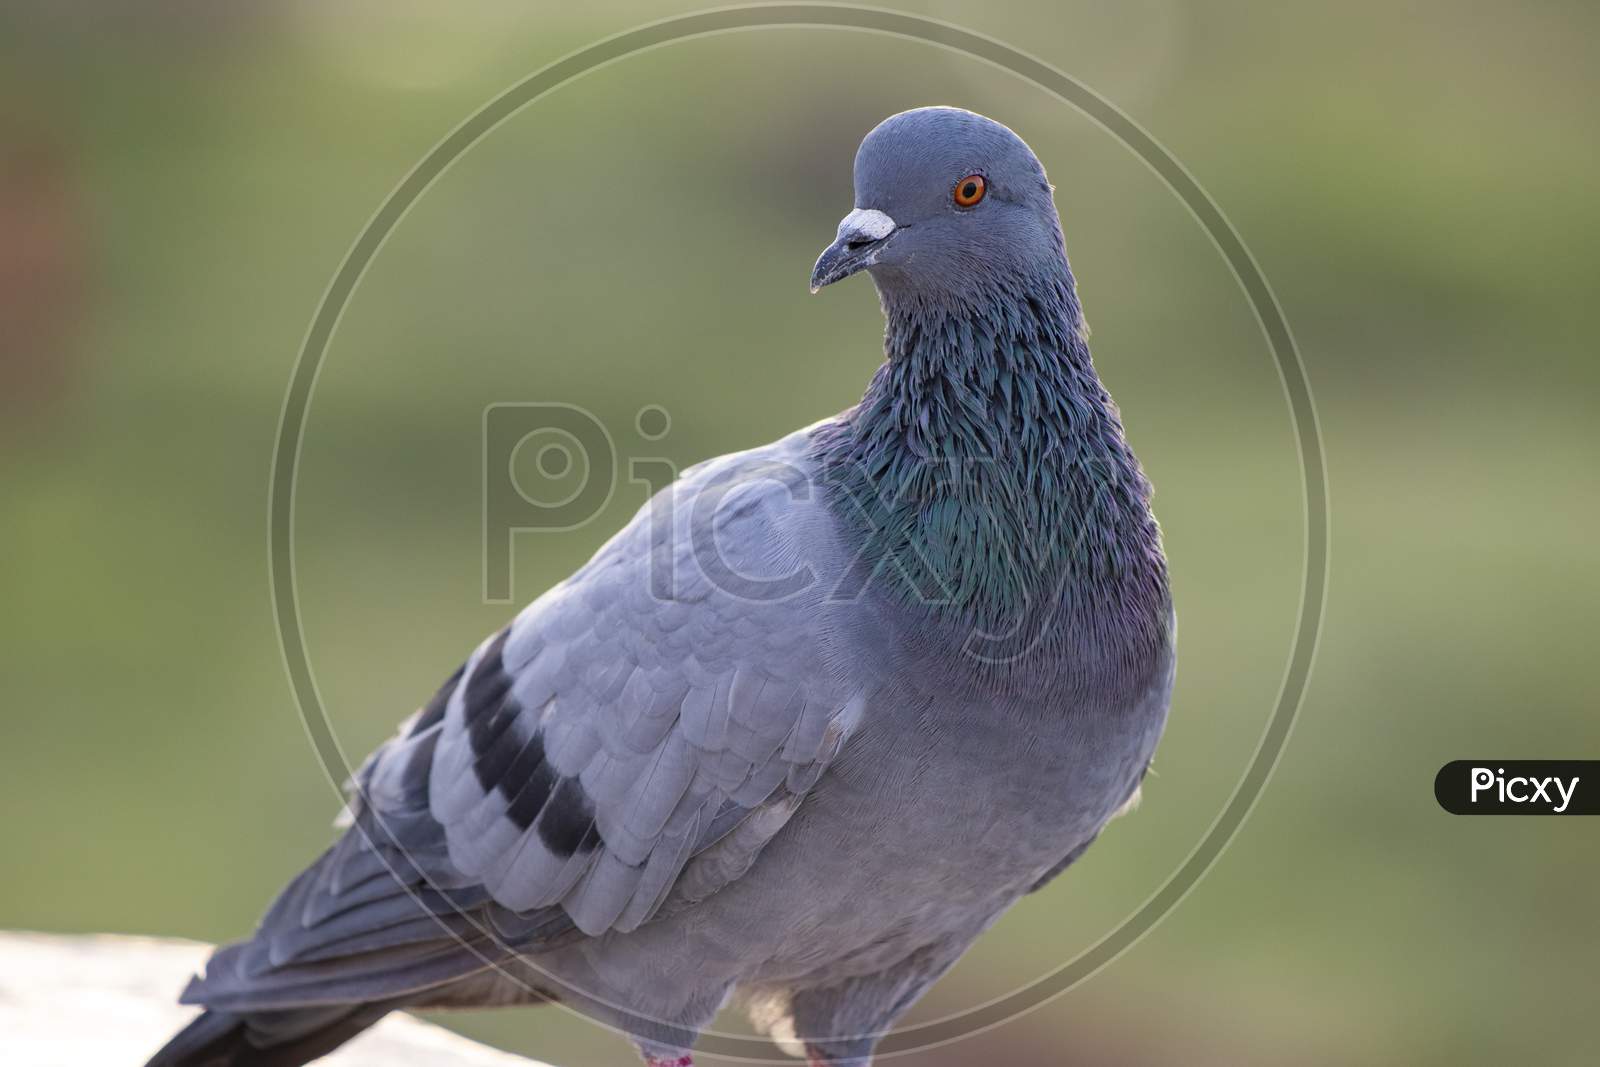 Indian Pigeon Or Rock Dove - The Rock Dove, Rock Pigeon, Or Common Pigeon Is A Member Of The Bird Family Columbidae. In Common Usage, This Bird Is Often Simply Referred To As The "Pigeon".